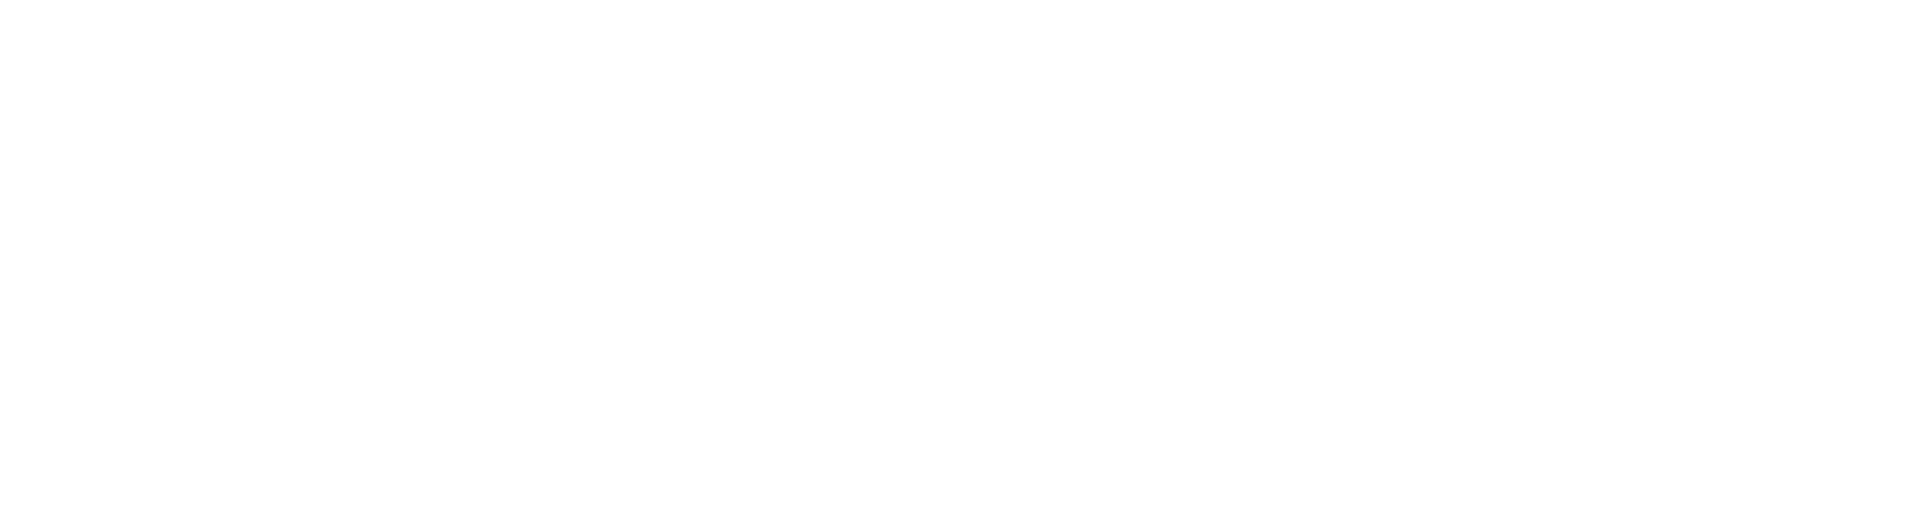 flags - 